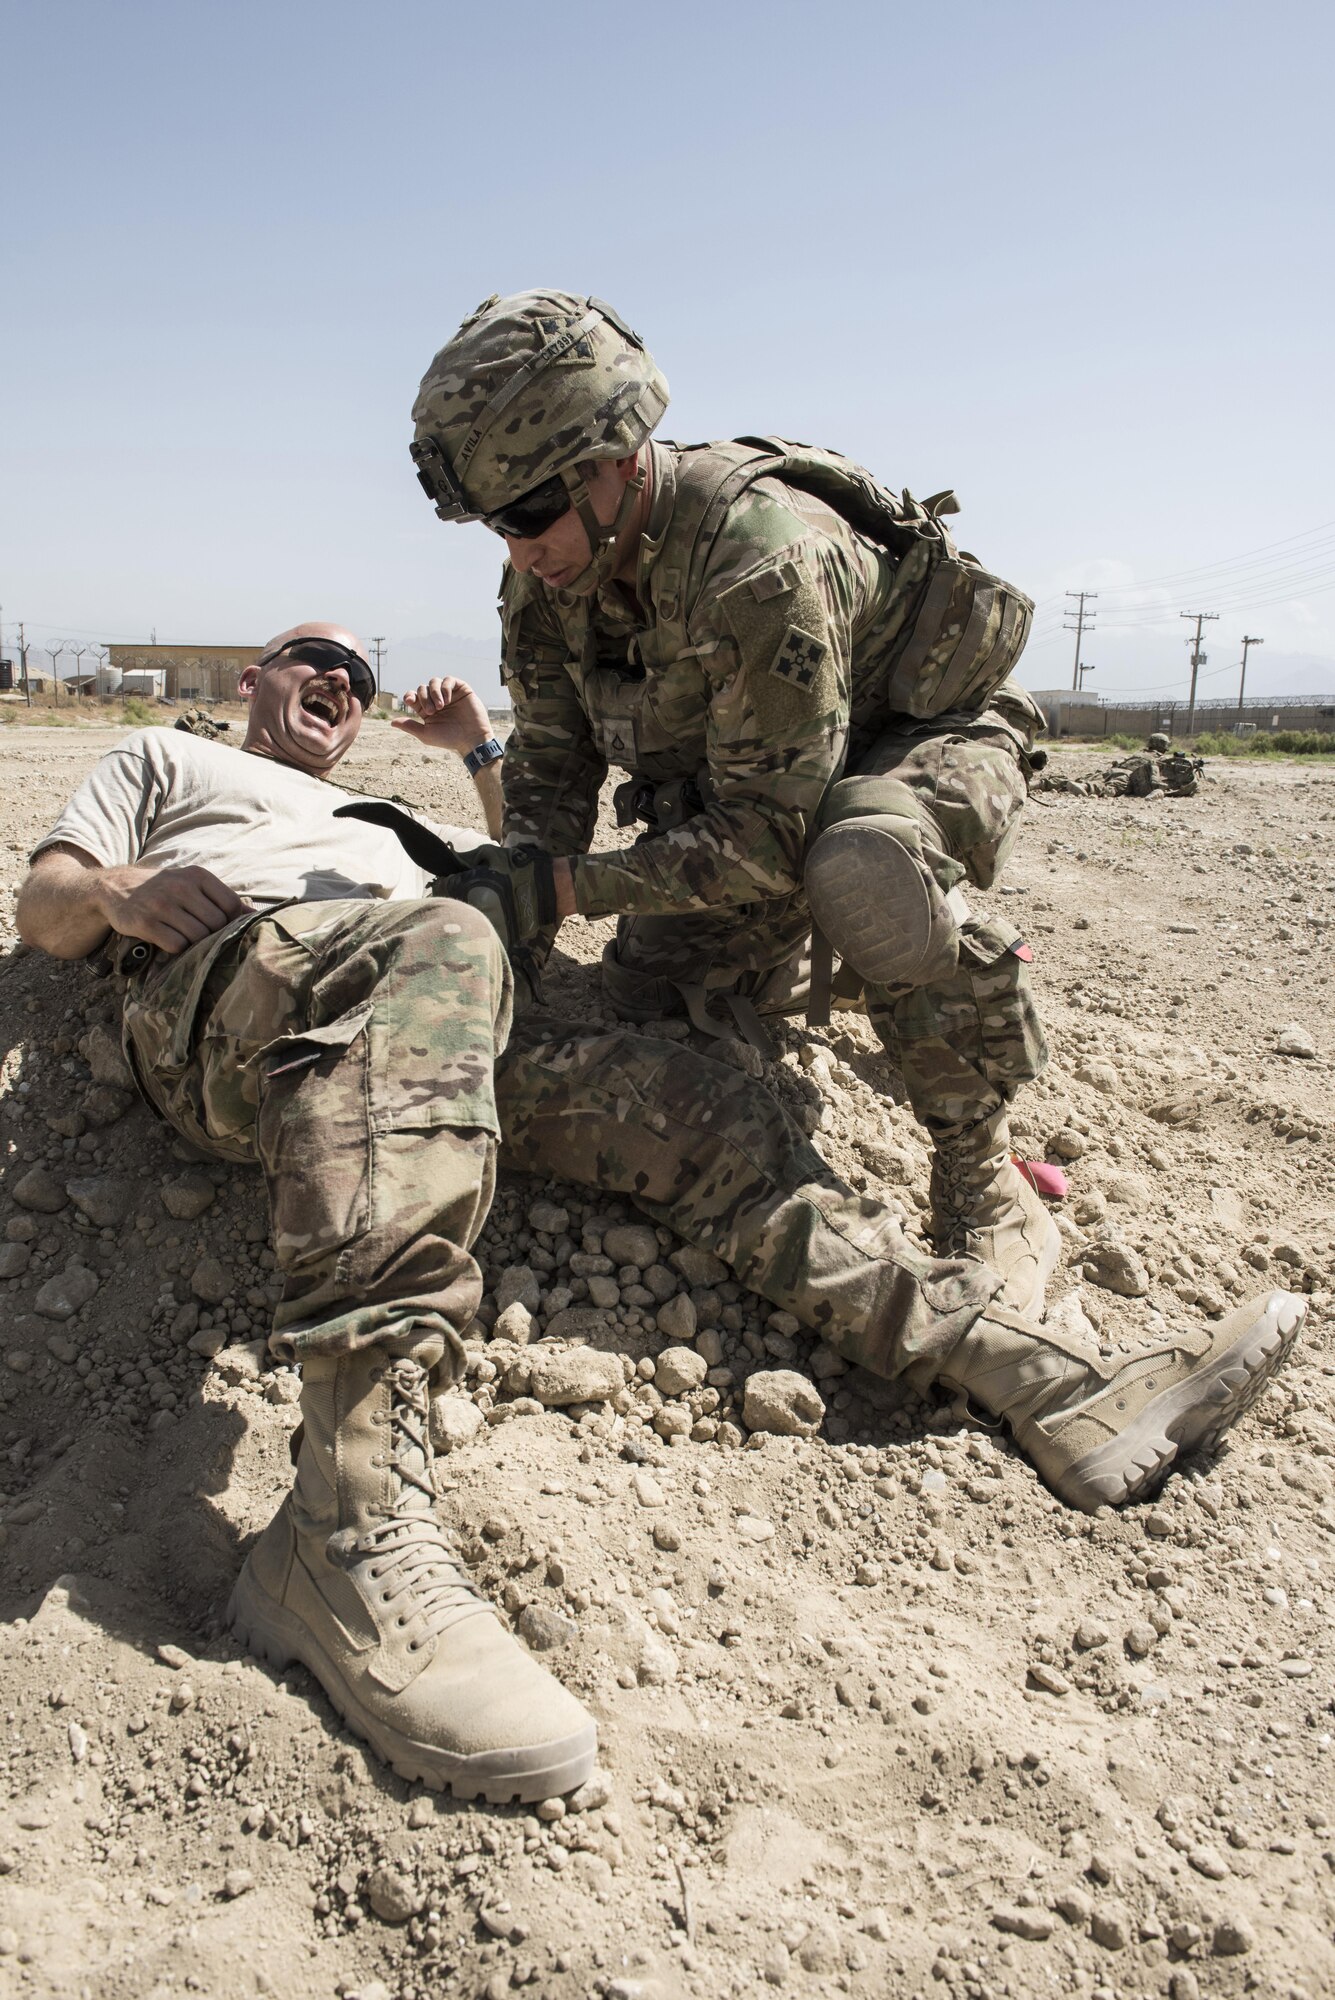 A U.S. Army soldier with Task Force Chosen, places a tourniquet on Capt. Joshua Nichols, 455th Air Expeditionary Wing military attorney, during a joint mass casualty and extraction exercise with Airmen from the 83rd Expeditionary Rescue Squadron. During the exercise scenario, the teams treated and extracted the wounded from damaged and burning vehicles. (U.S. Air Force photo by Tech. Sgt. Tyrona Lawson).